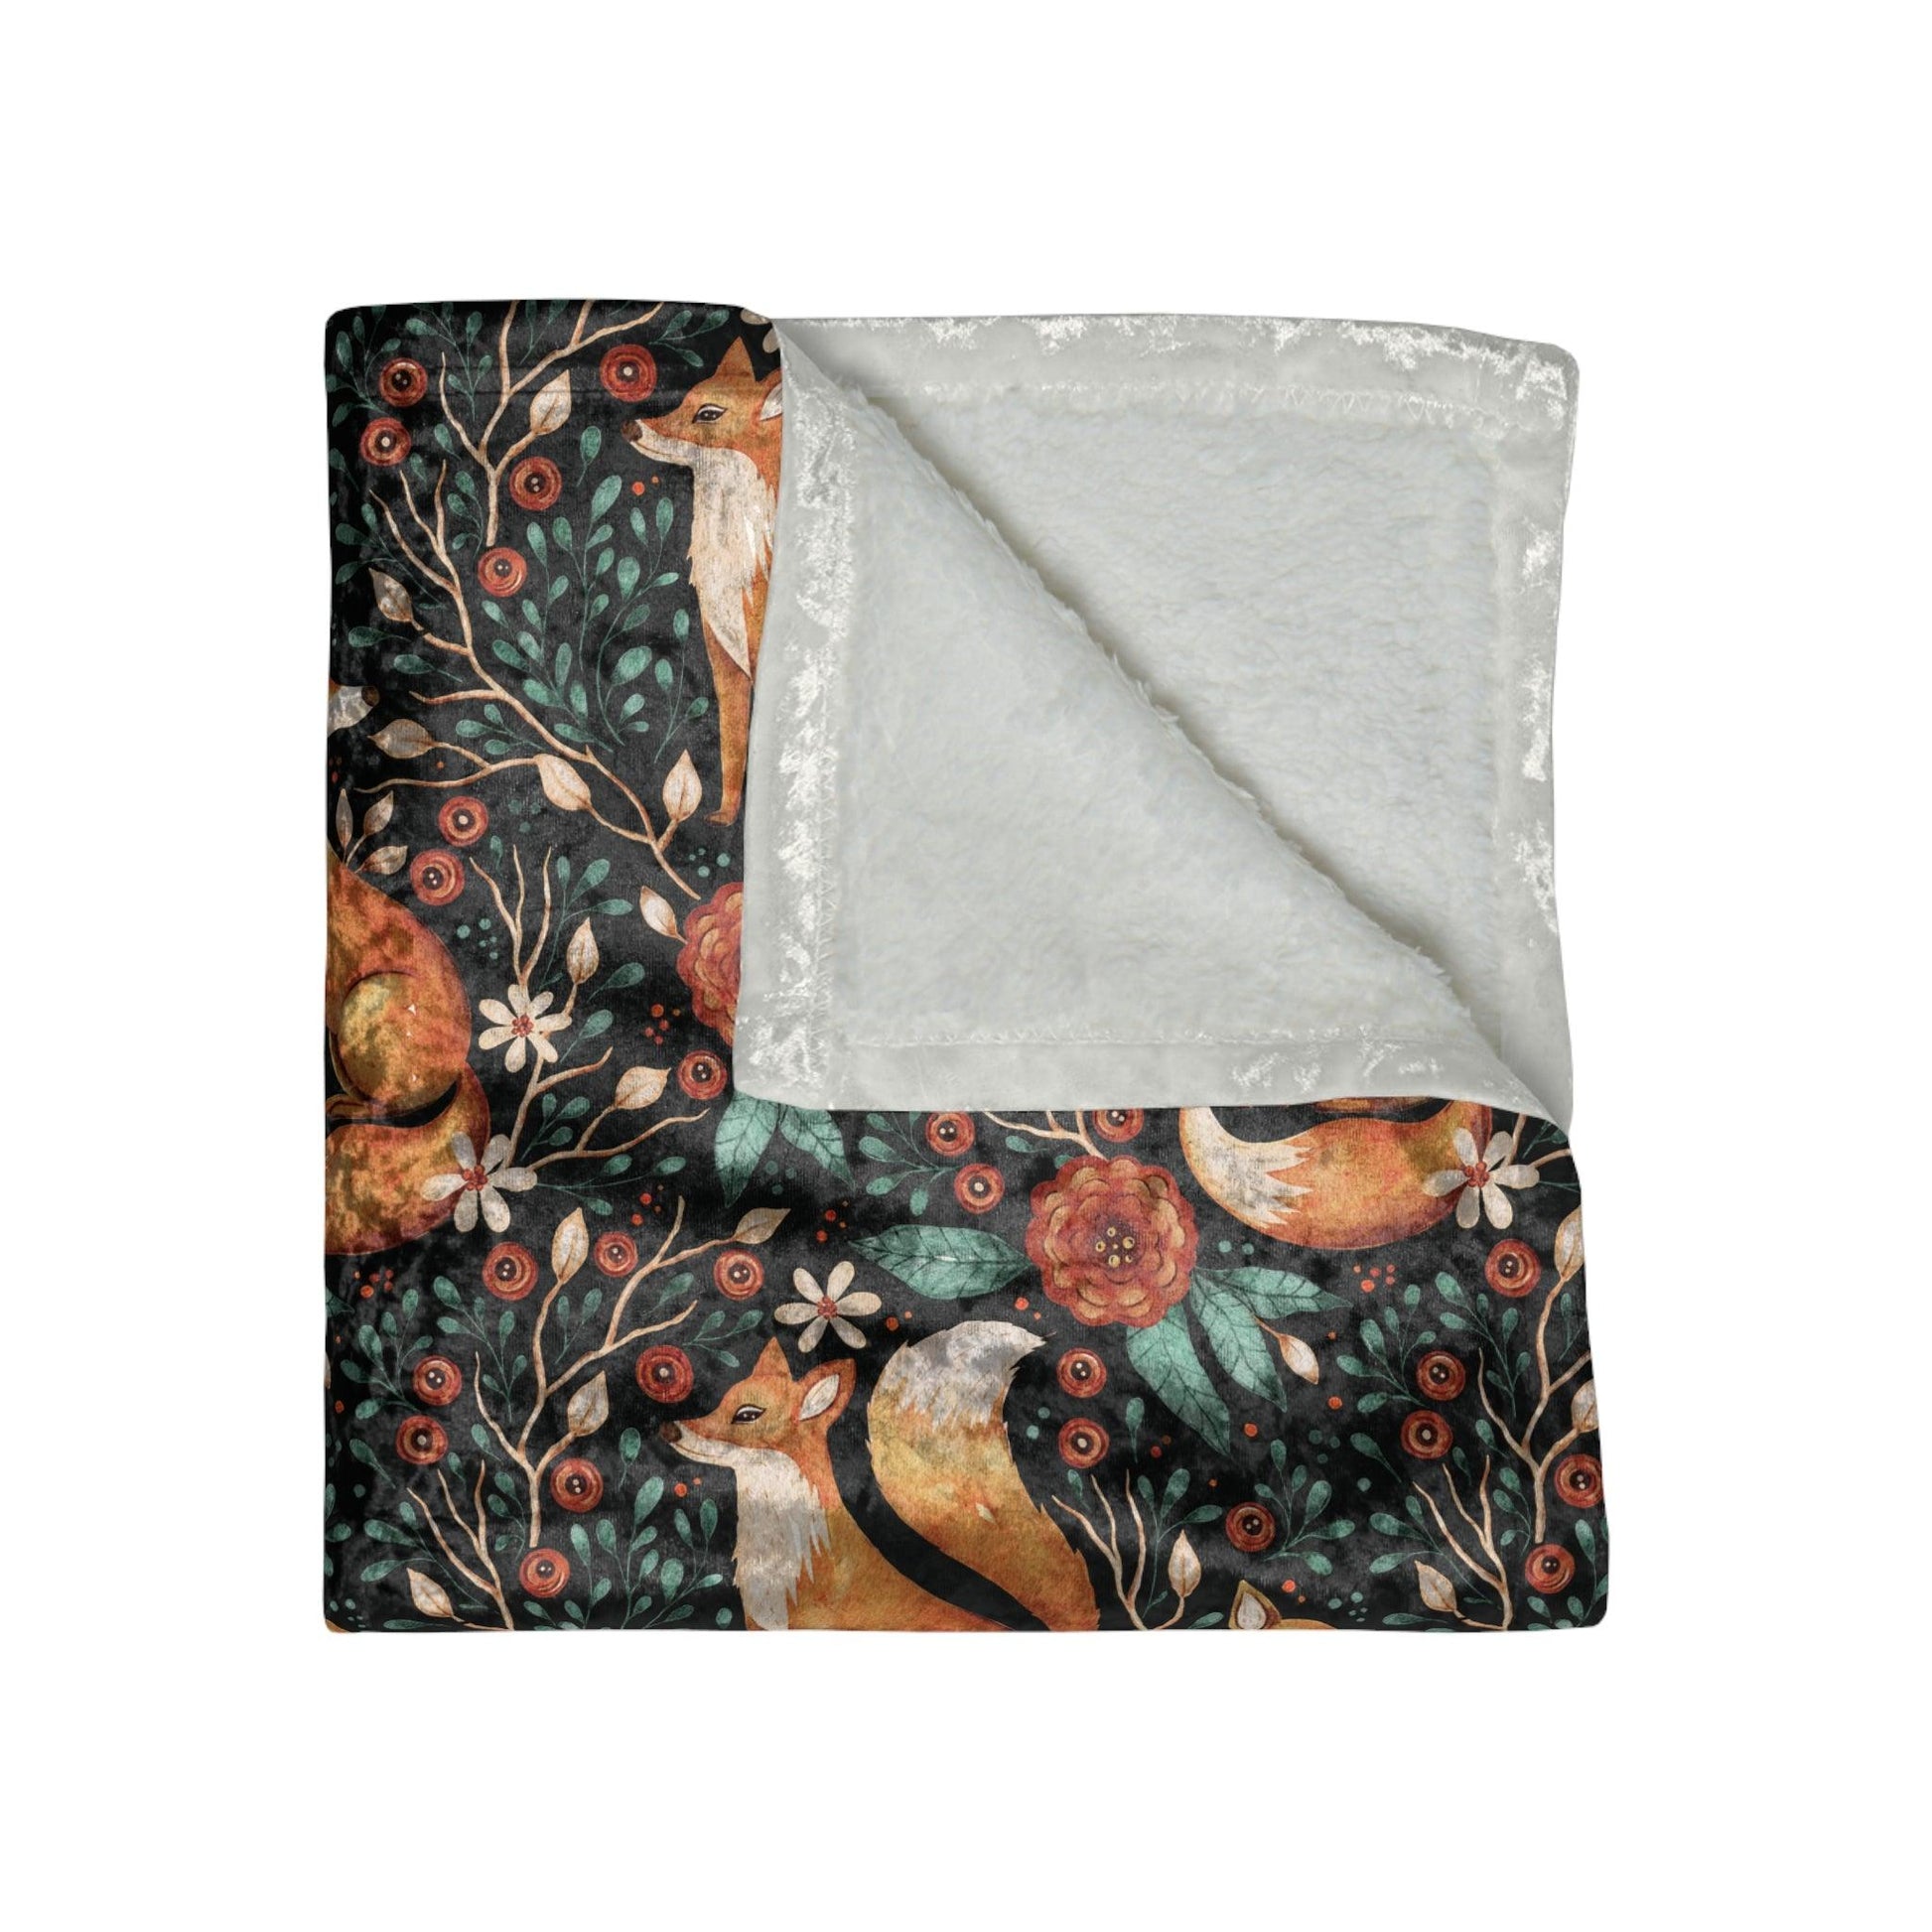 Fox Enchanted Forest Woodland Dark Cottagecore Watercolor-Style Multicolor Crushed Velvet Blanket | lovevisionkarma.com